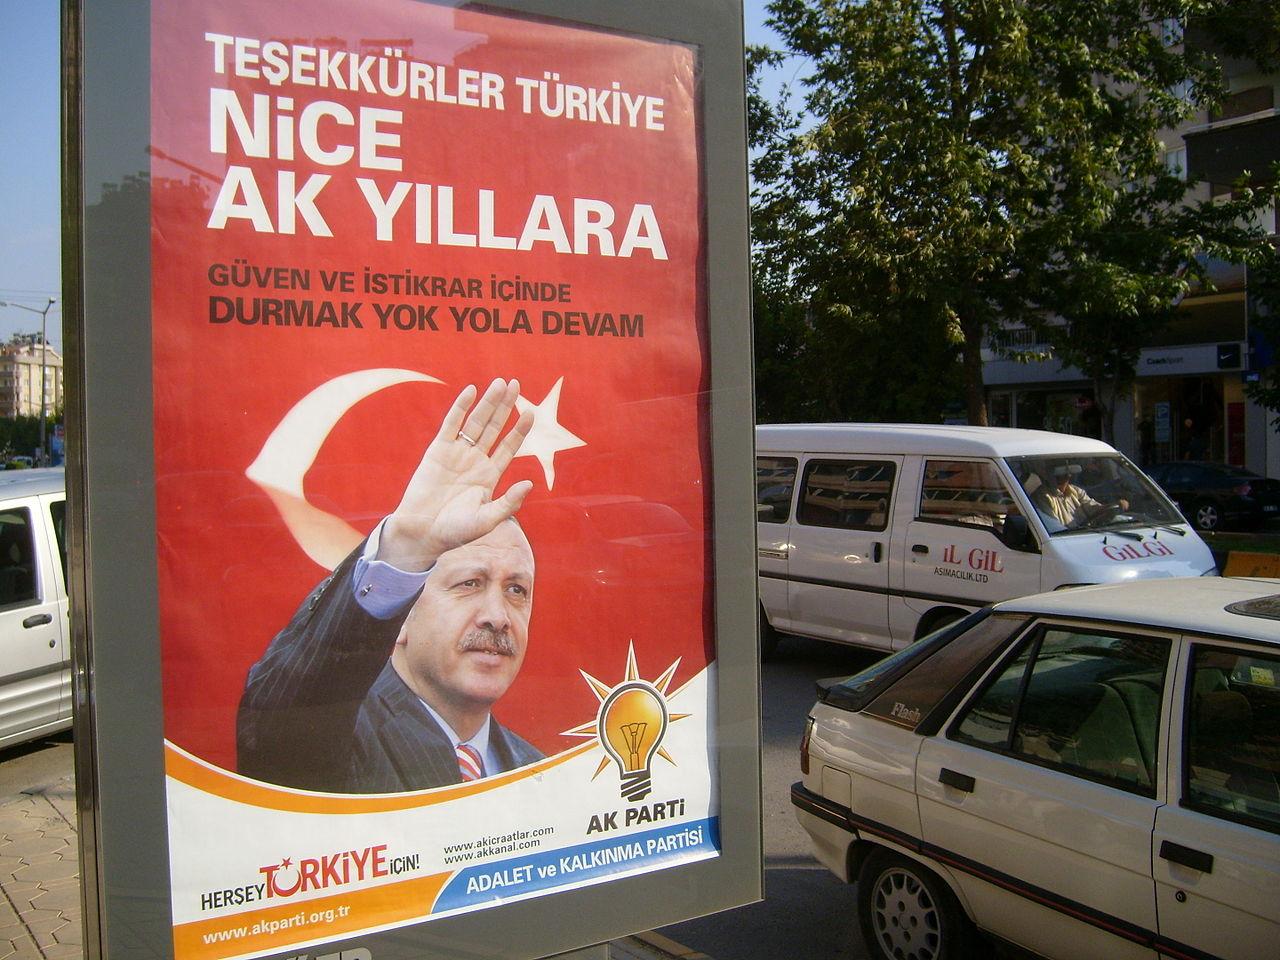 AKP leader Erdoğan on a poster thanking the people for the 2007 election results